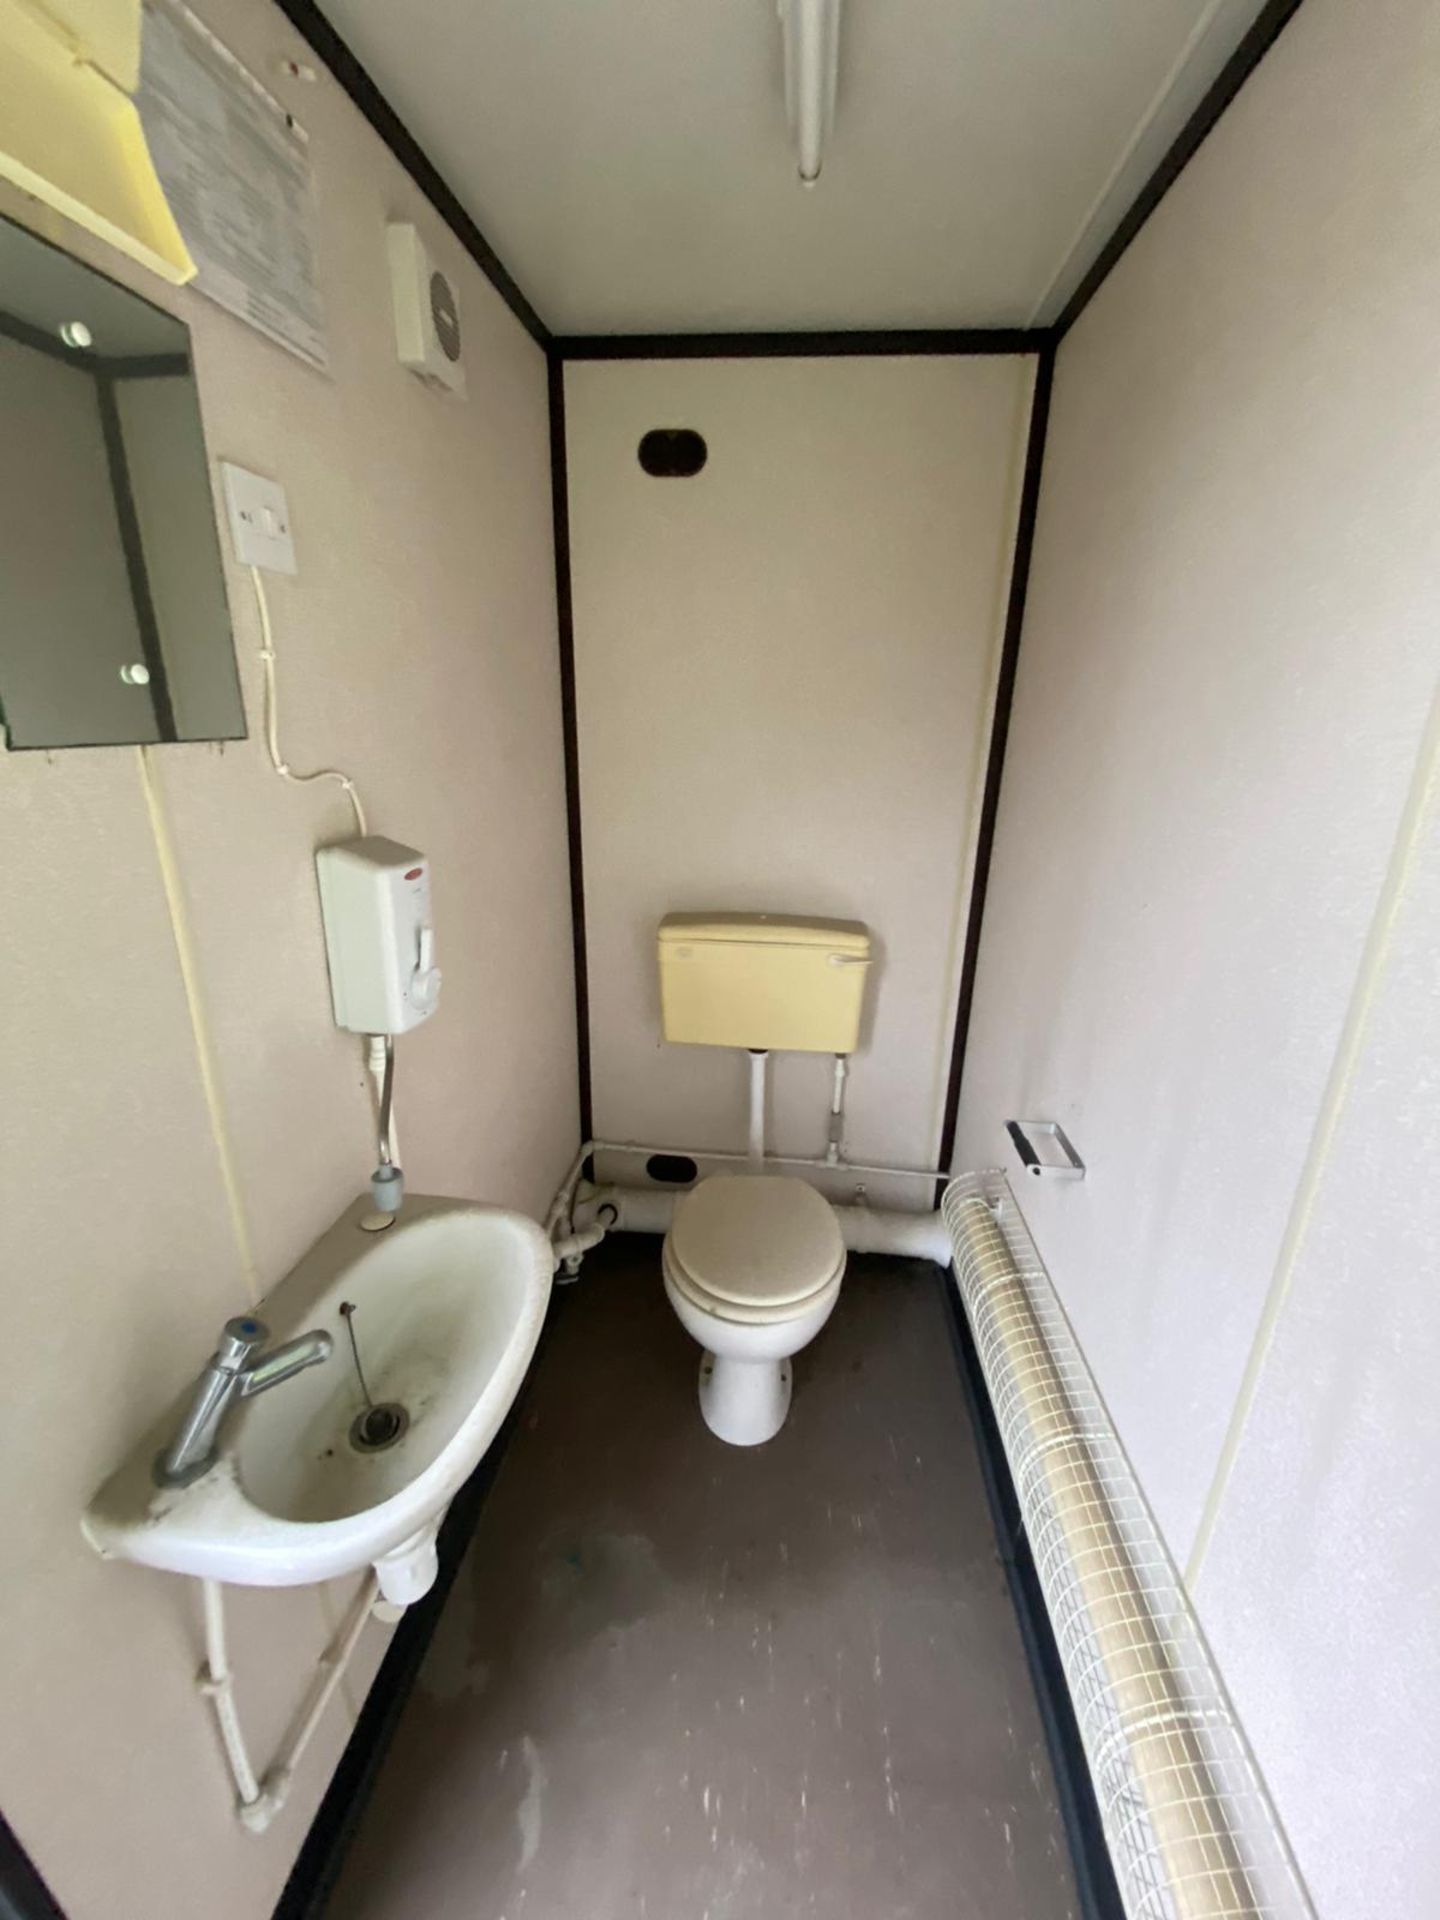 32ft 6 + 1 male and female toilet block - Image 17 of 17